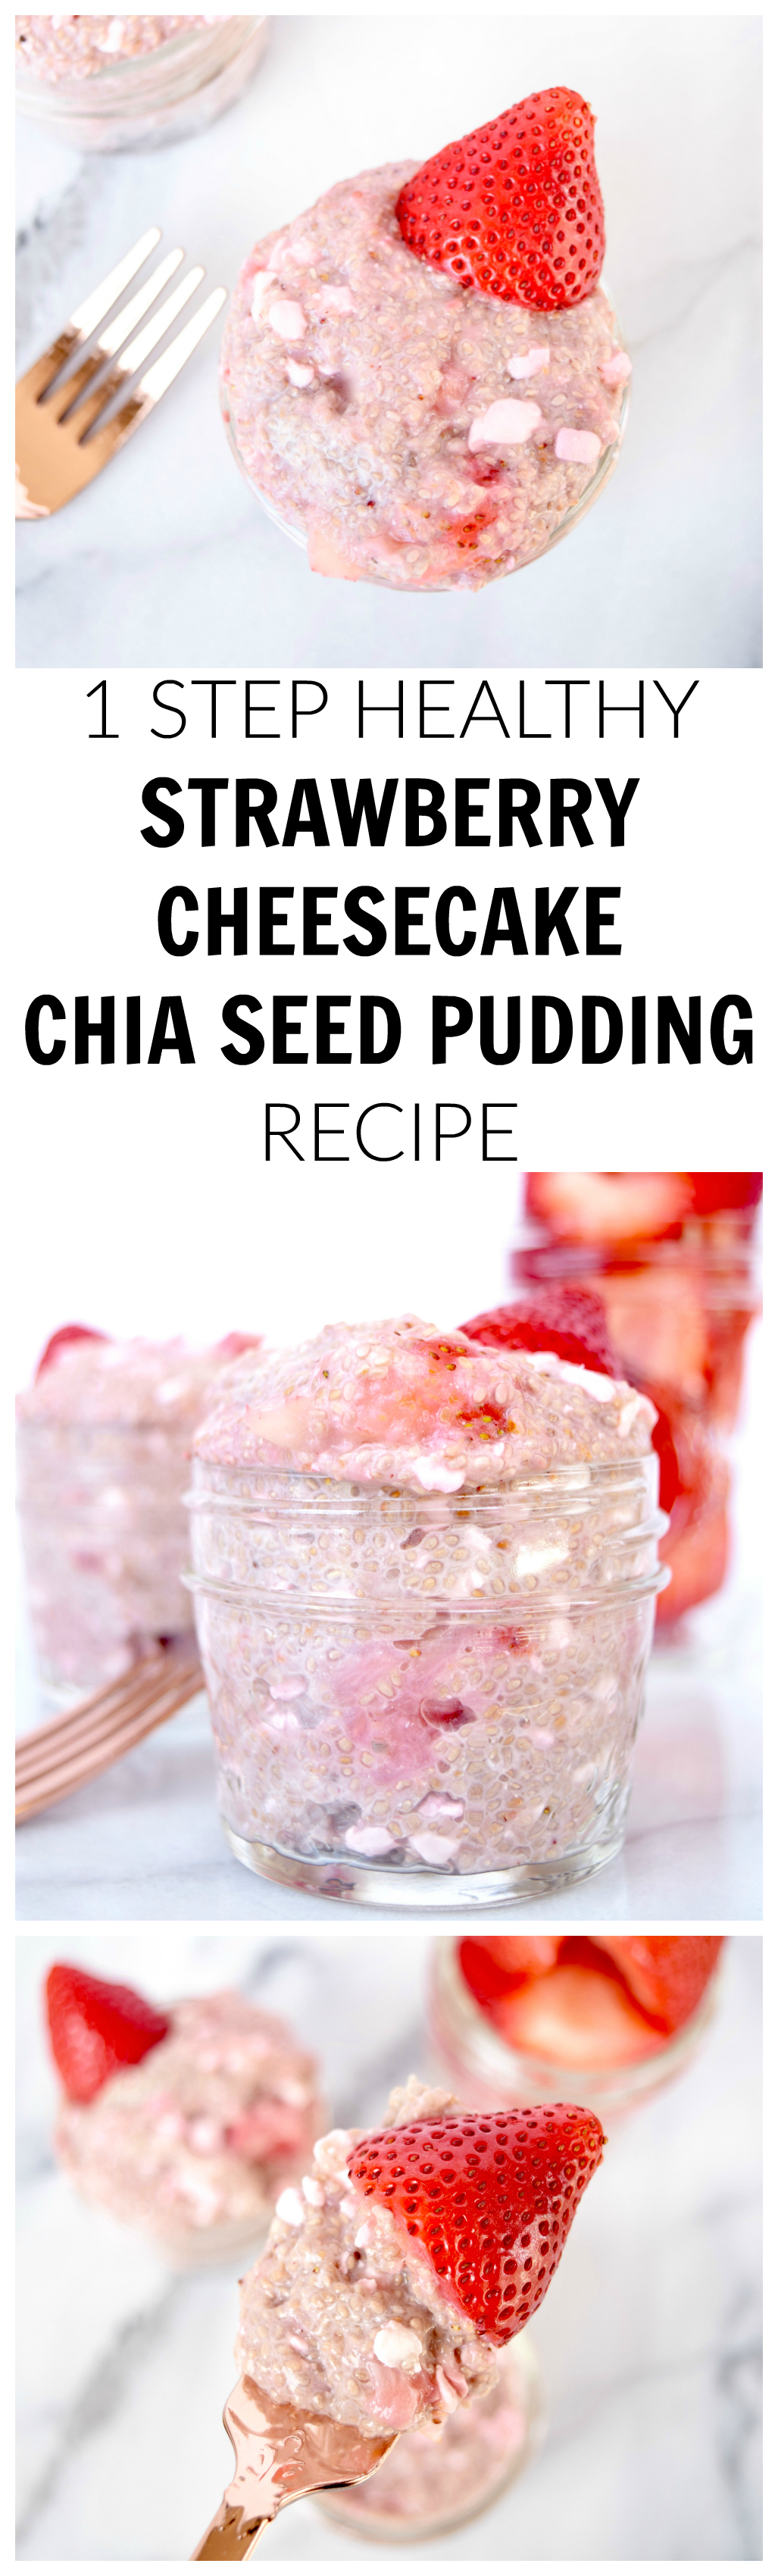 1 STEP HEALTHY STRAWBERRY CHEESECAKE CHIA SEED PUDDING RECIPE